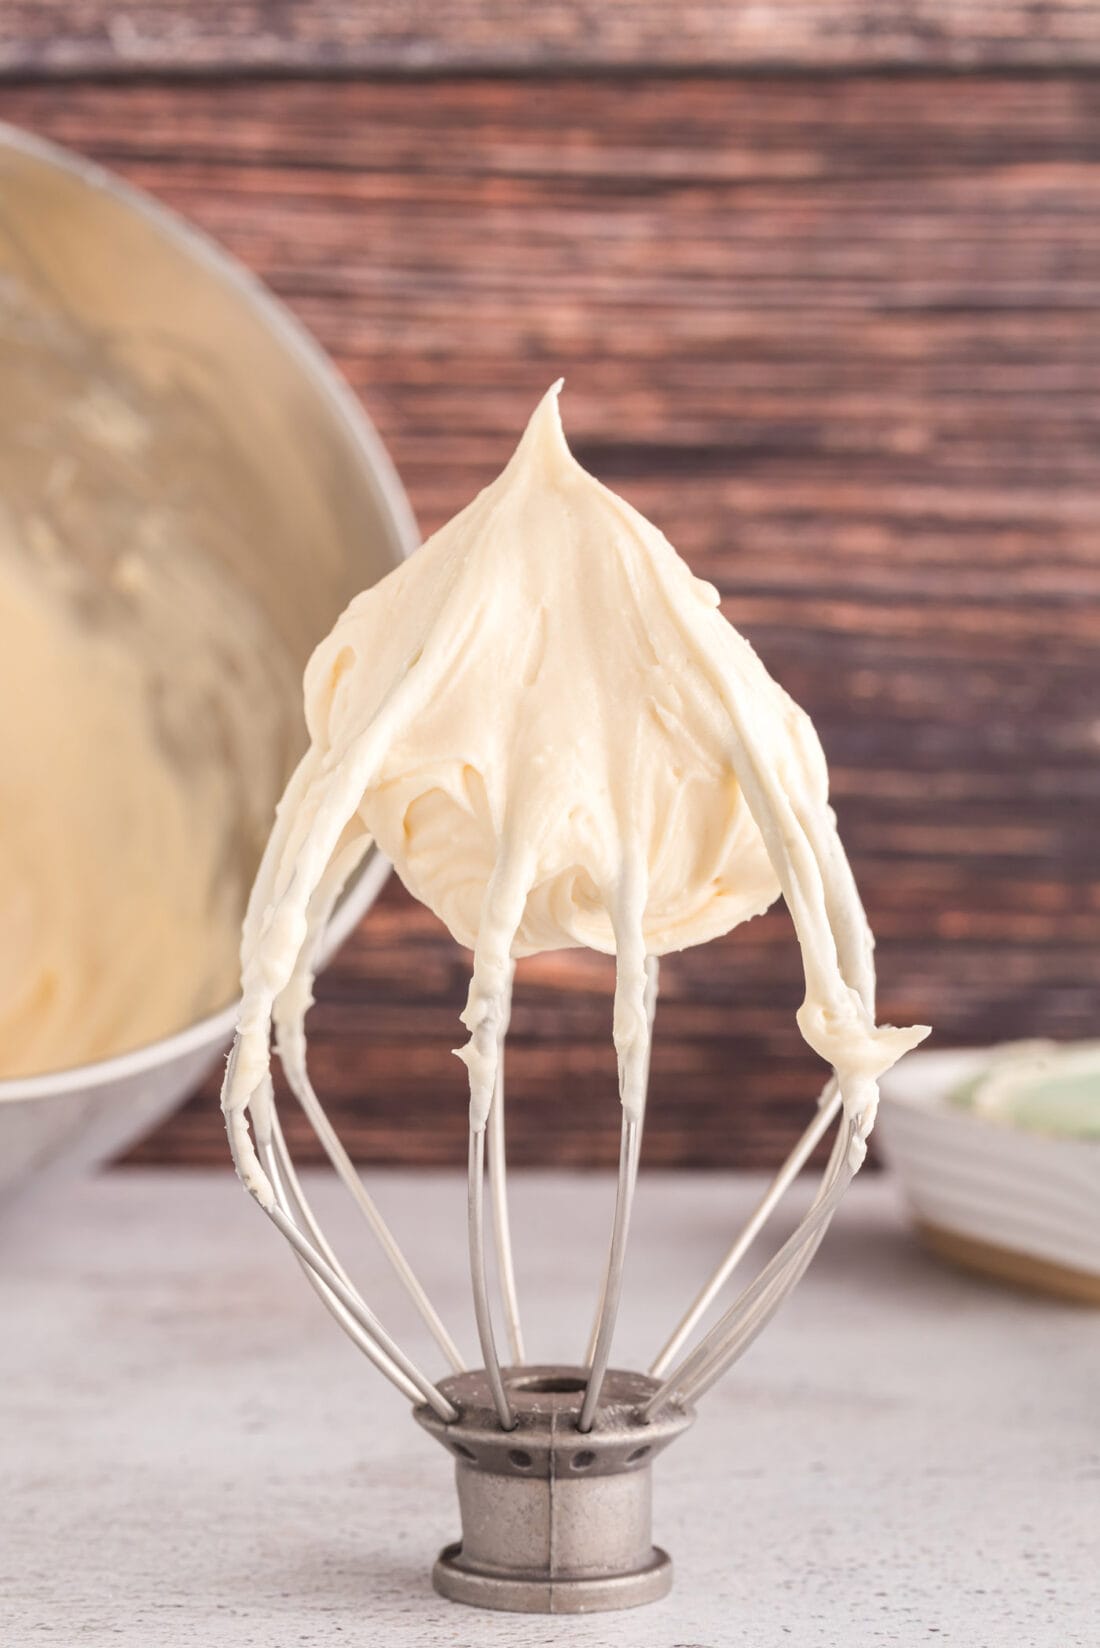 Cream Cheese Frosting on a whisk